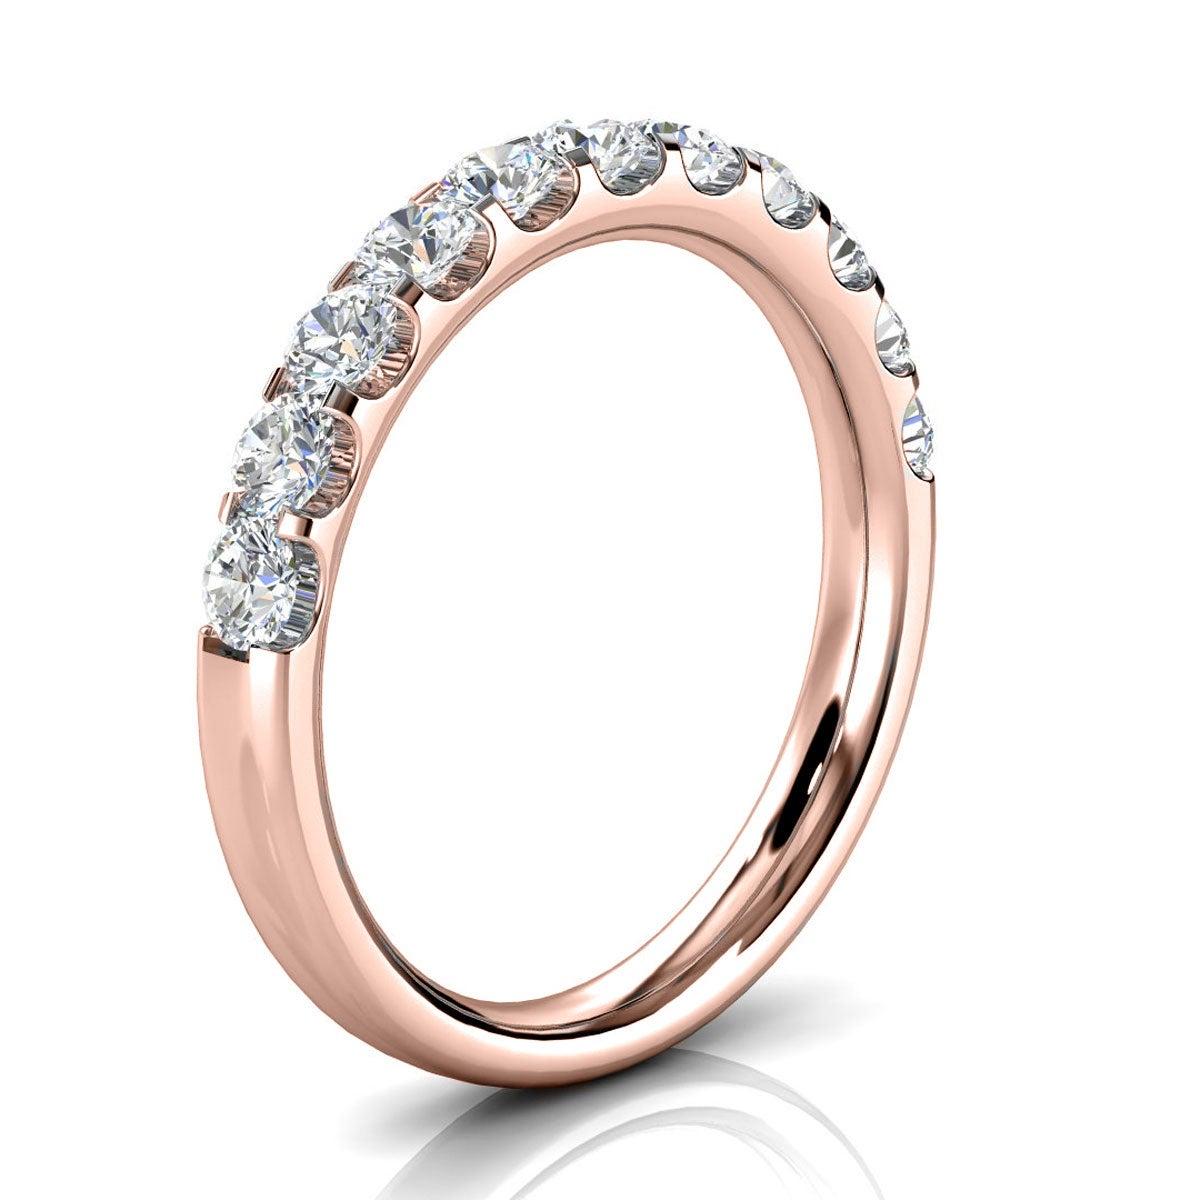 For Sale:  18k Rose Gold Valerie Micro-Prong Diamond Ring '1 Ct. Tw' 2